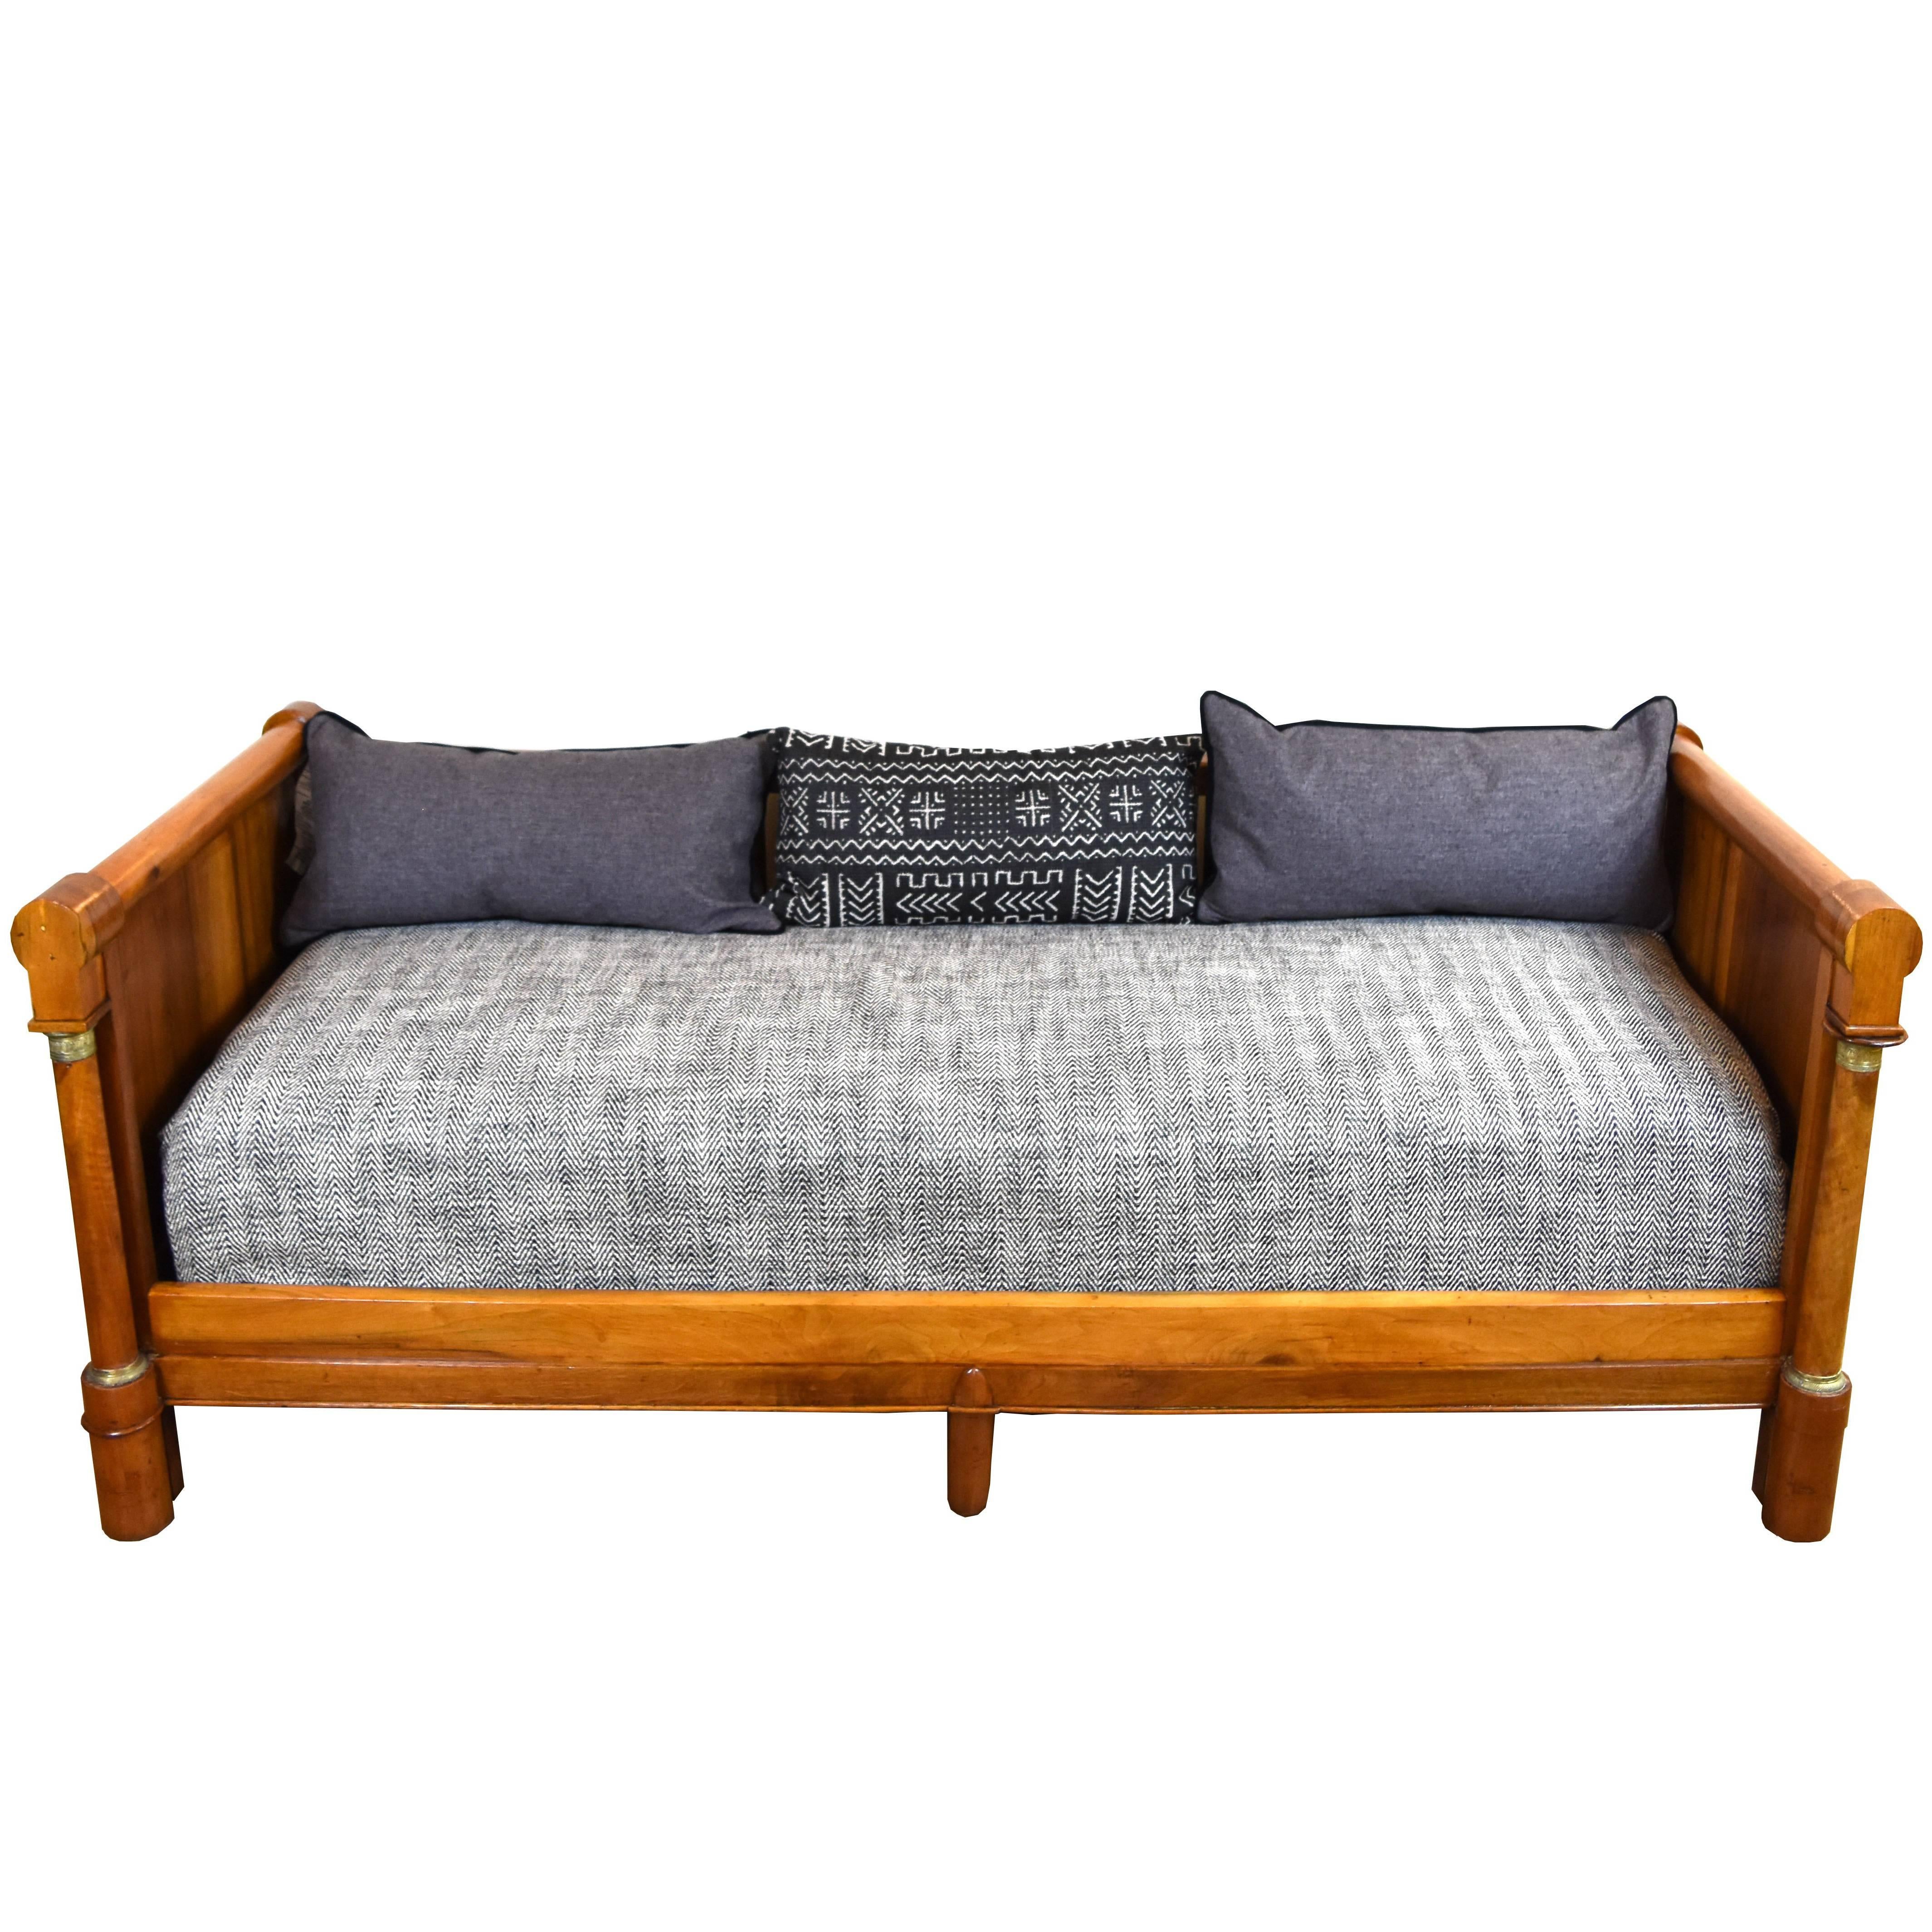 19th Century Empire Style Walnut Daybed